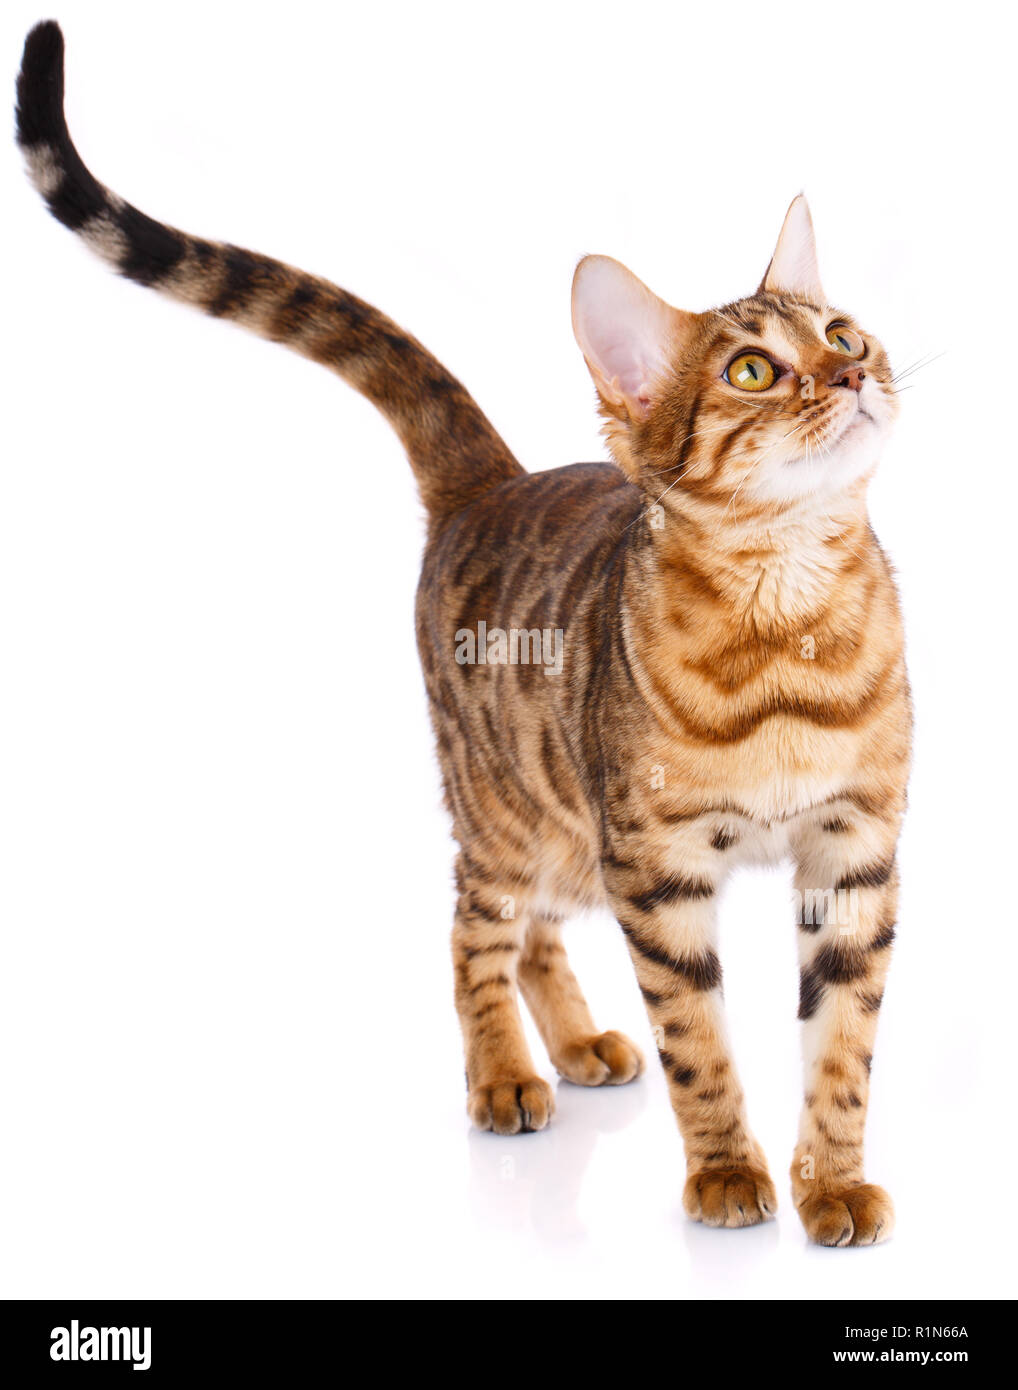 Playful Bengal cat looking up. Pets, animals and cats concept Stock Photo -  Alamy